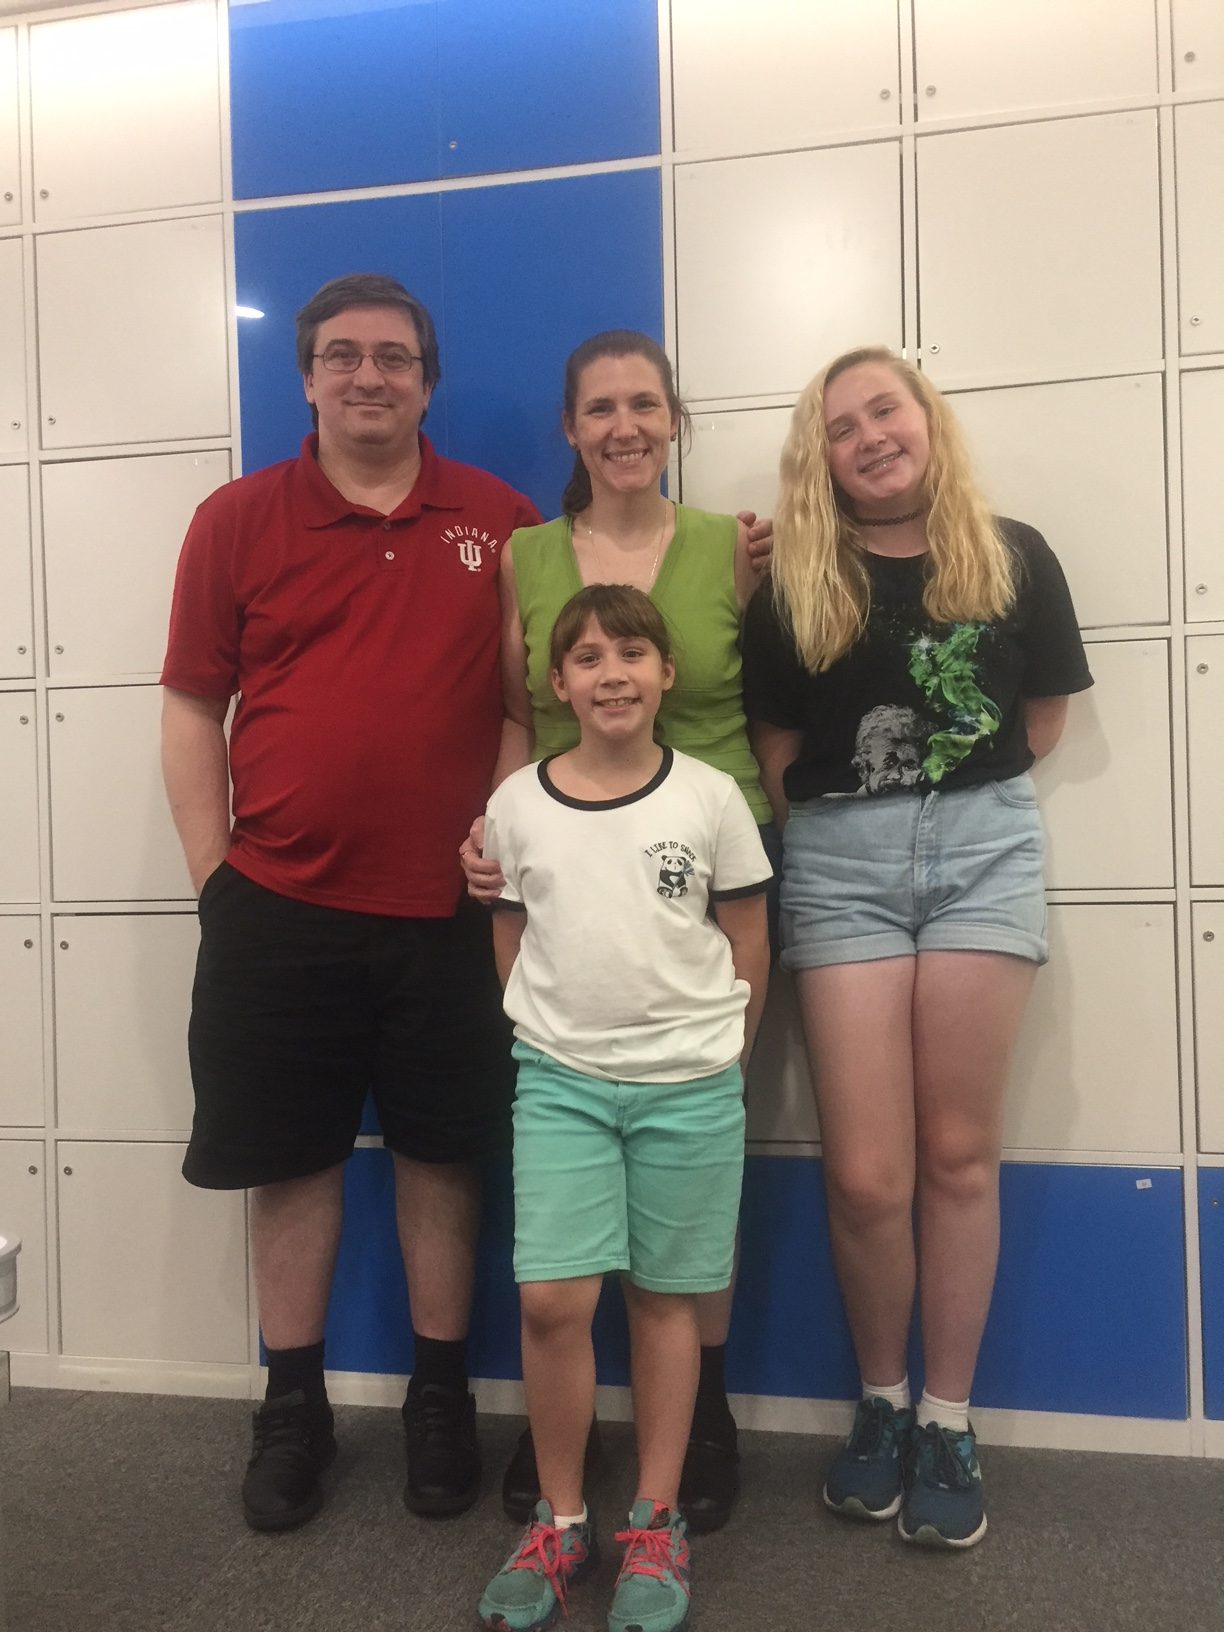 The Chabowski's at LTL Beijing in the Summer of 2018